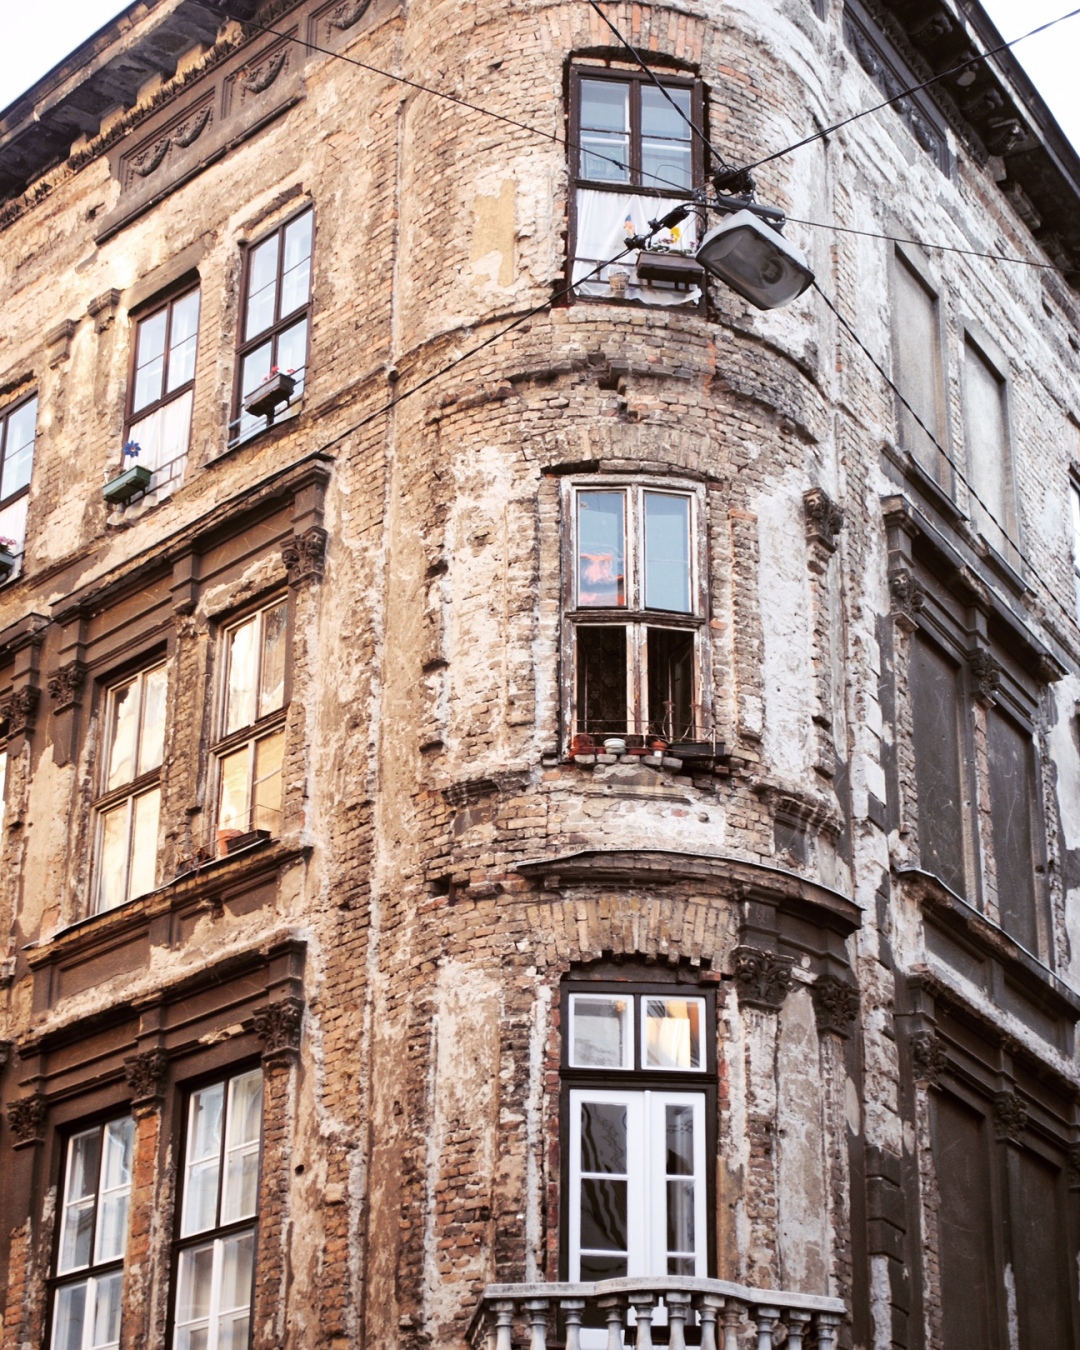 There are so many unique reasons to visit Budapest, including these crumbling facades.